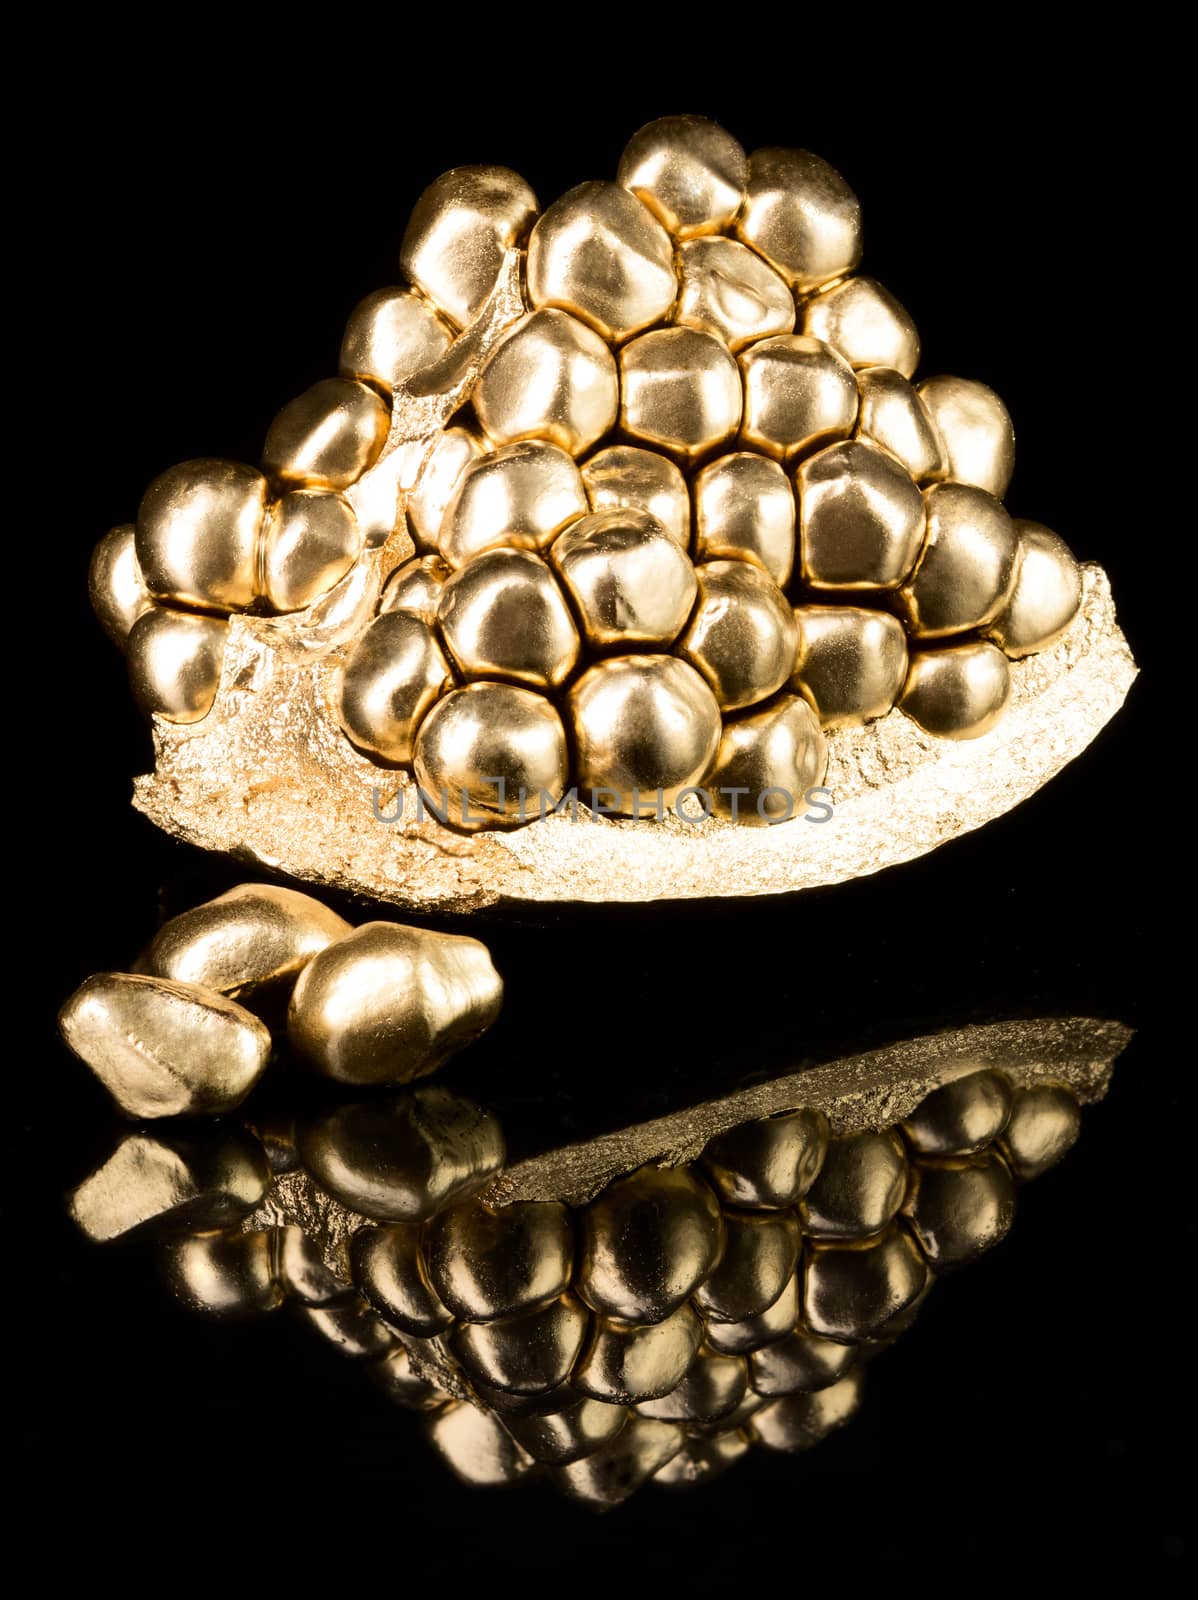 Piece of pomegranate in gold on black background